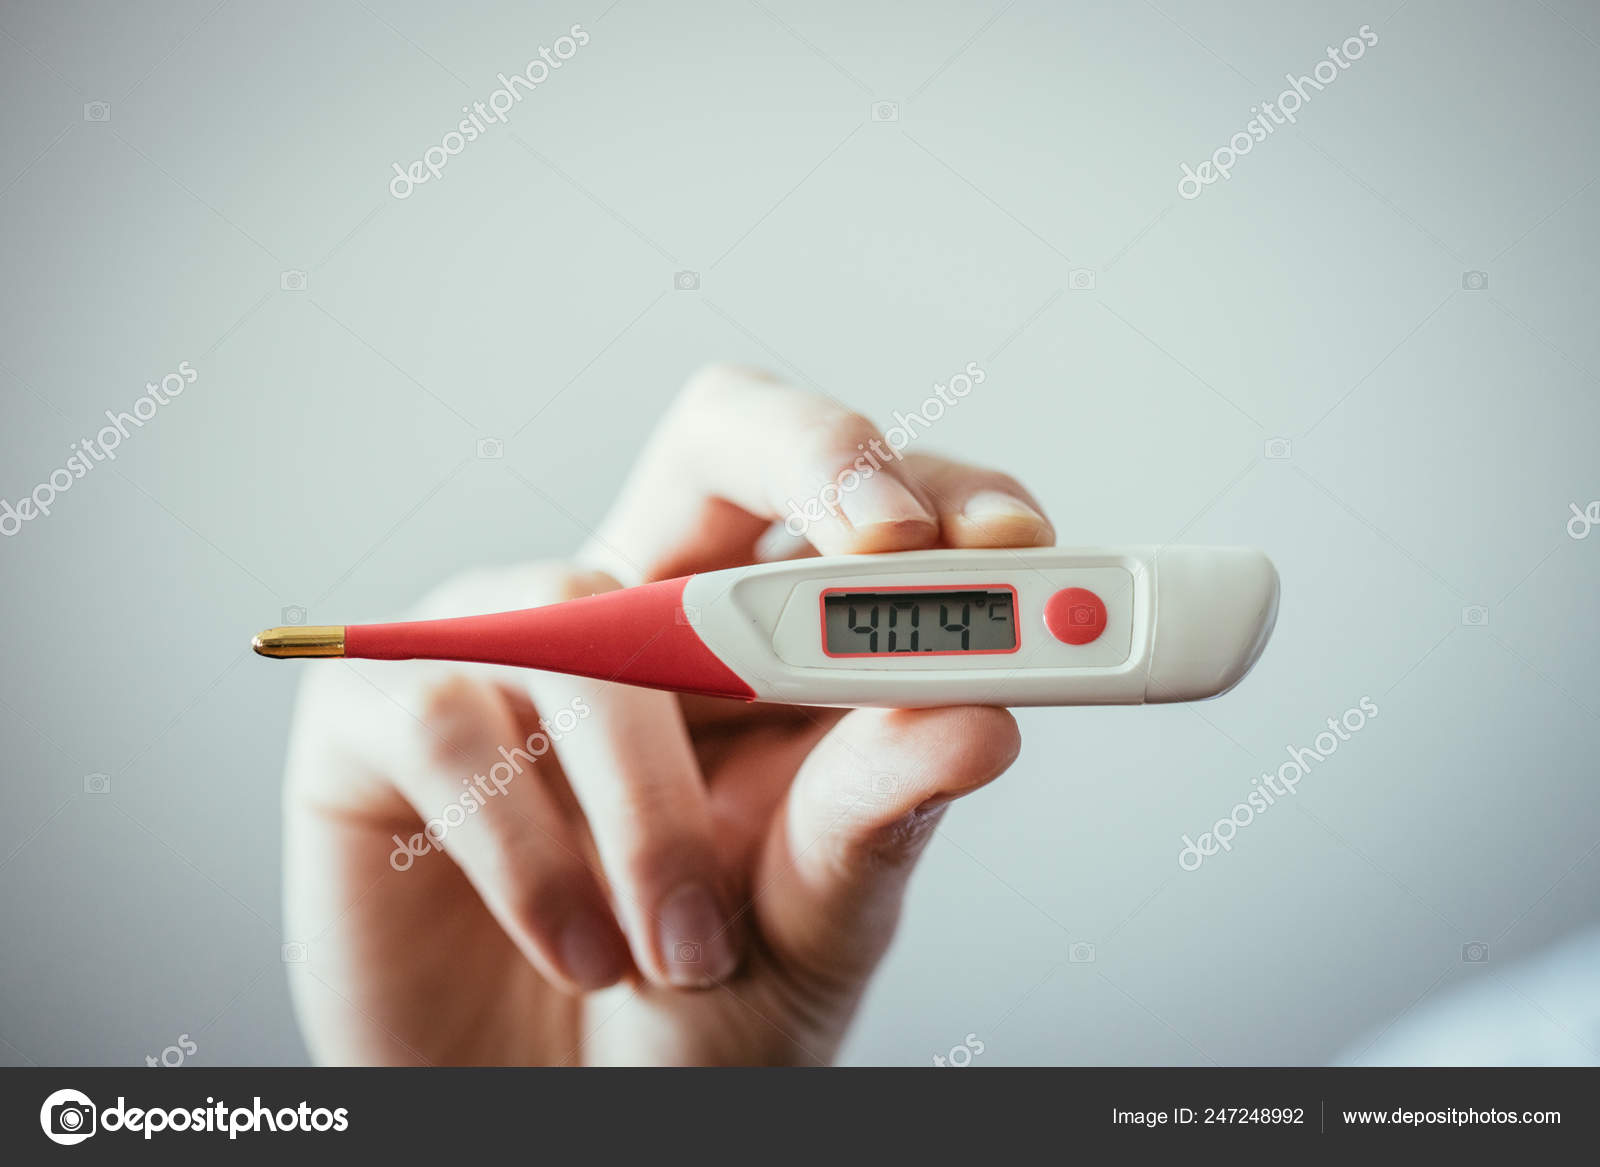 Man Holding Fever Thermometer His Hand.